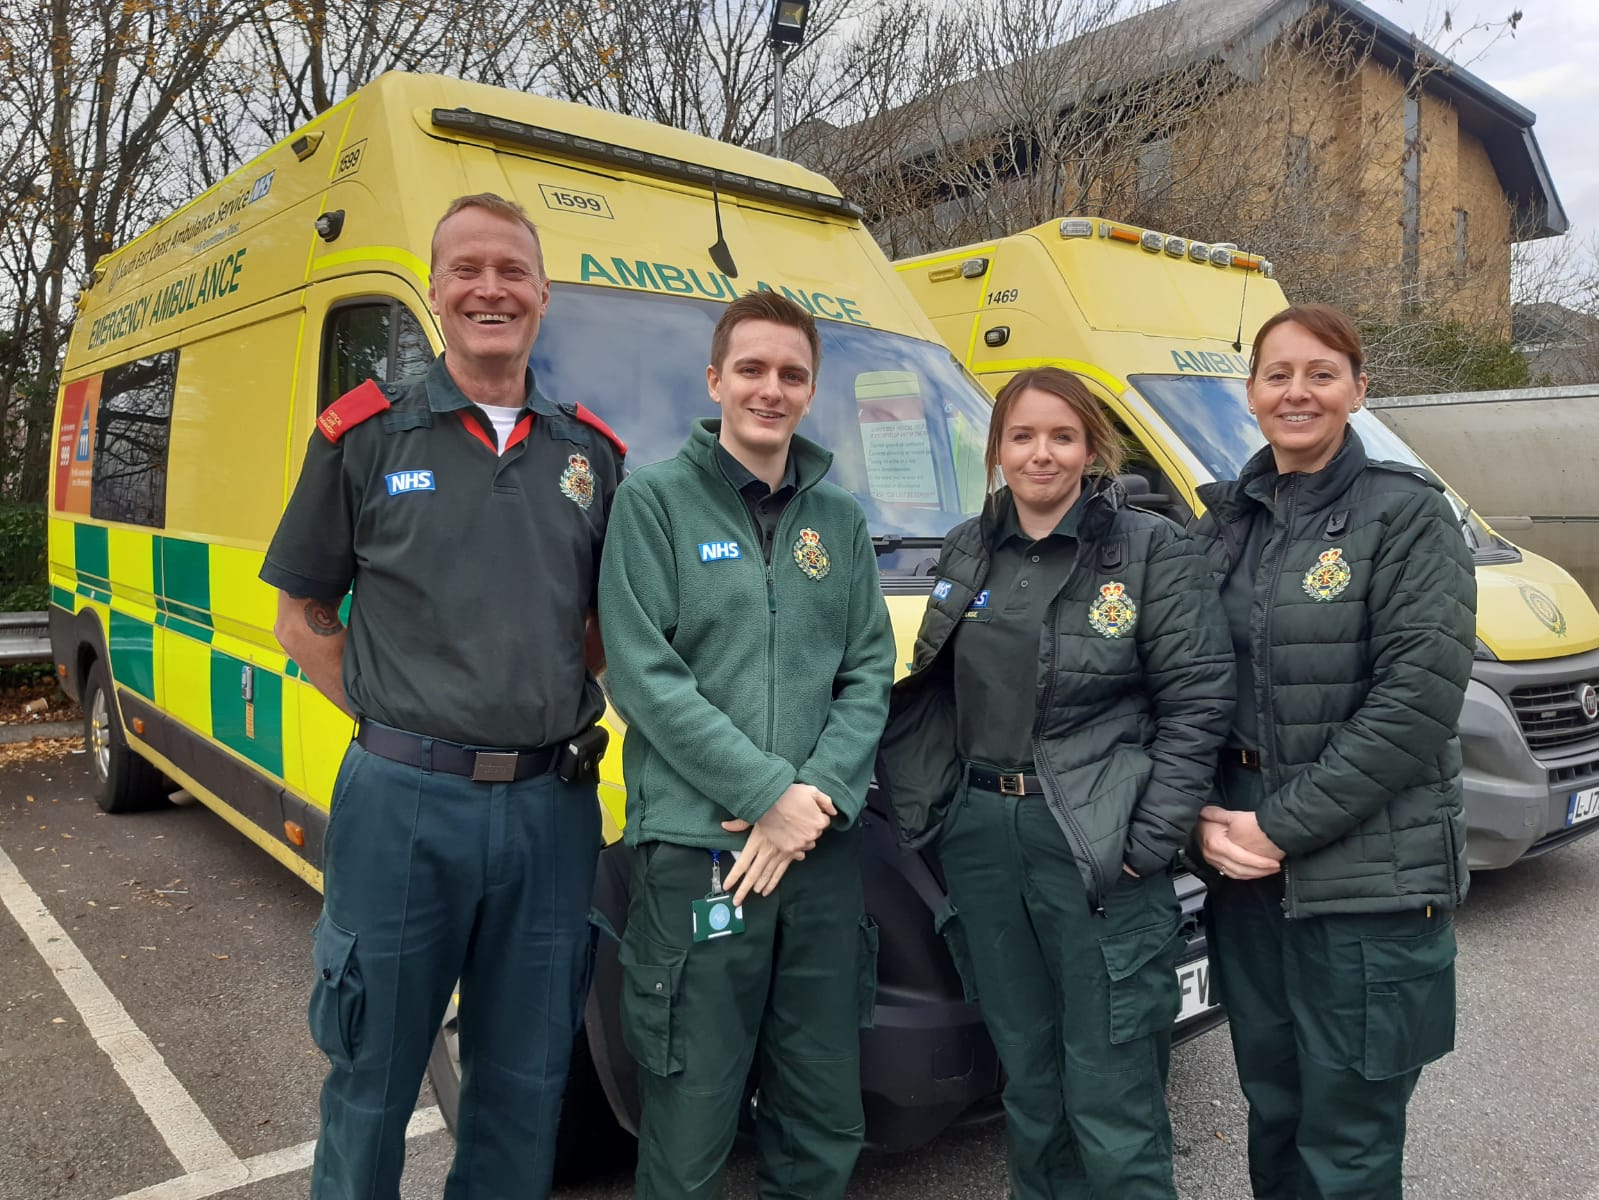 Patient, turned colleague, reunited with ambulance team